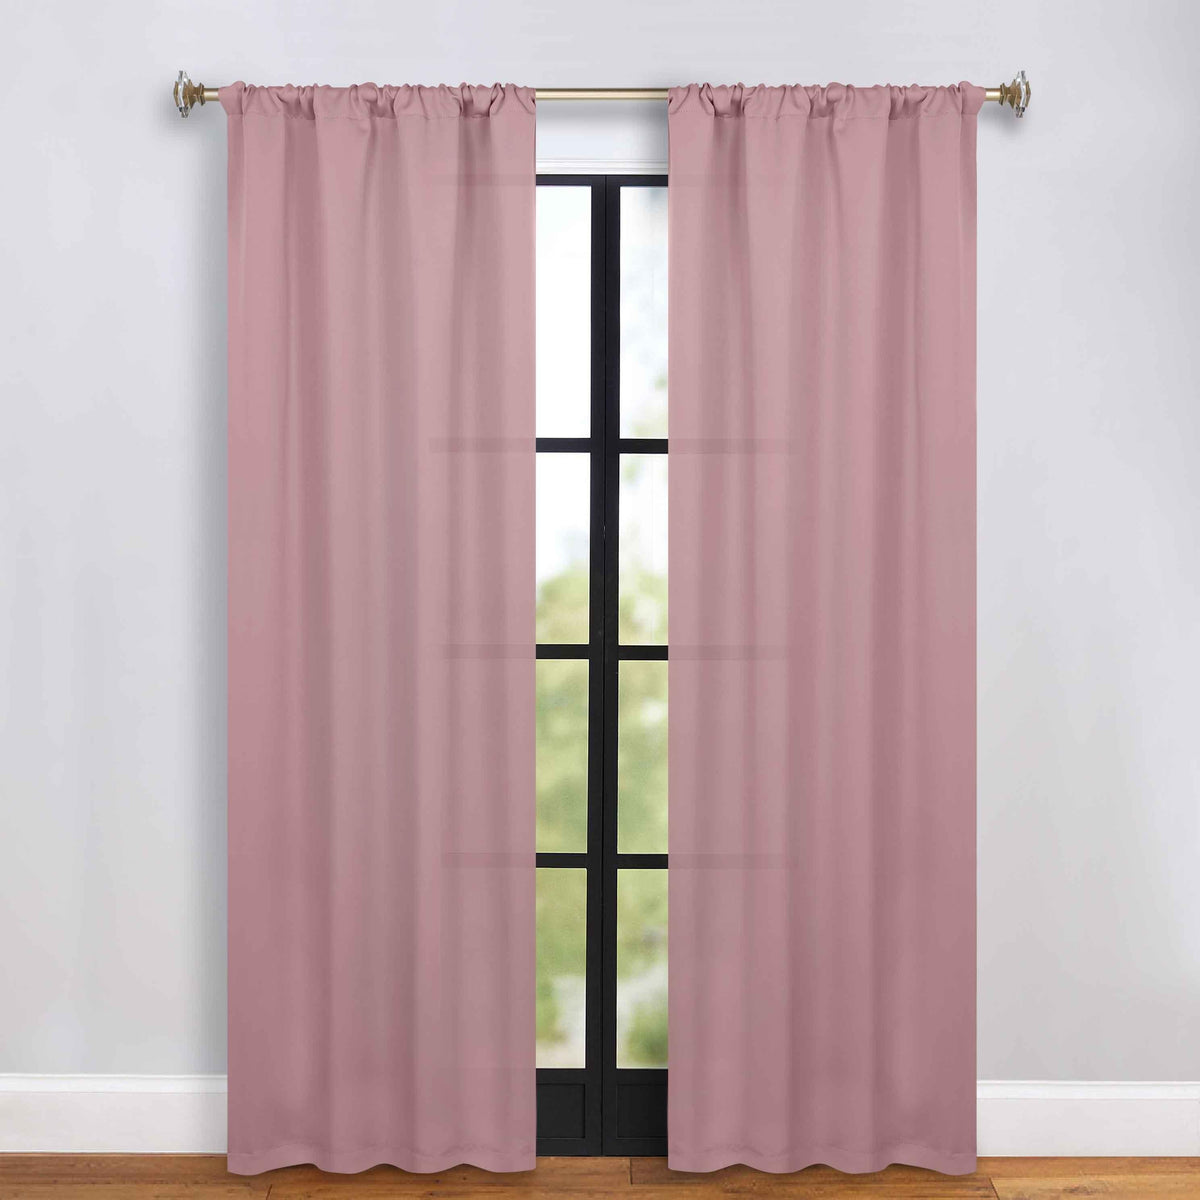 Solid Room Darkening Blackout Curtain Panels, Rod Pocket, Set of 2 - Blackout Curtains by Superior - Superior 